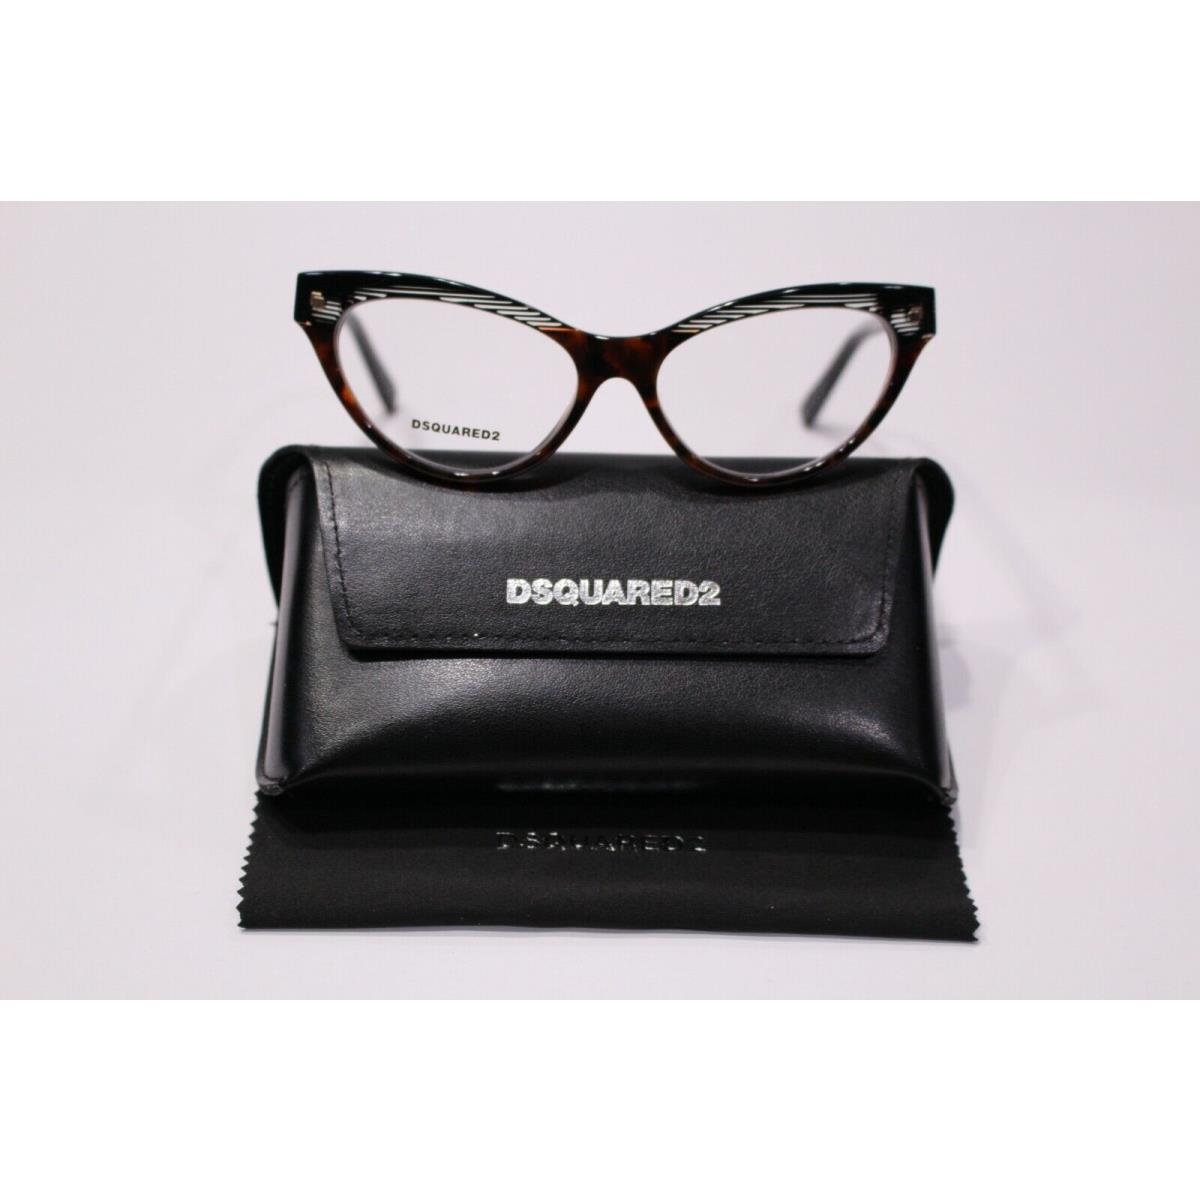 Dsquared2 Eyeglasses DQ5159 005 Black with Clear Stripes 54mm